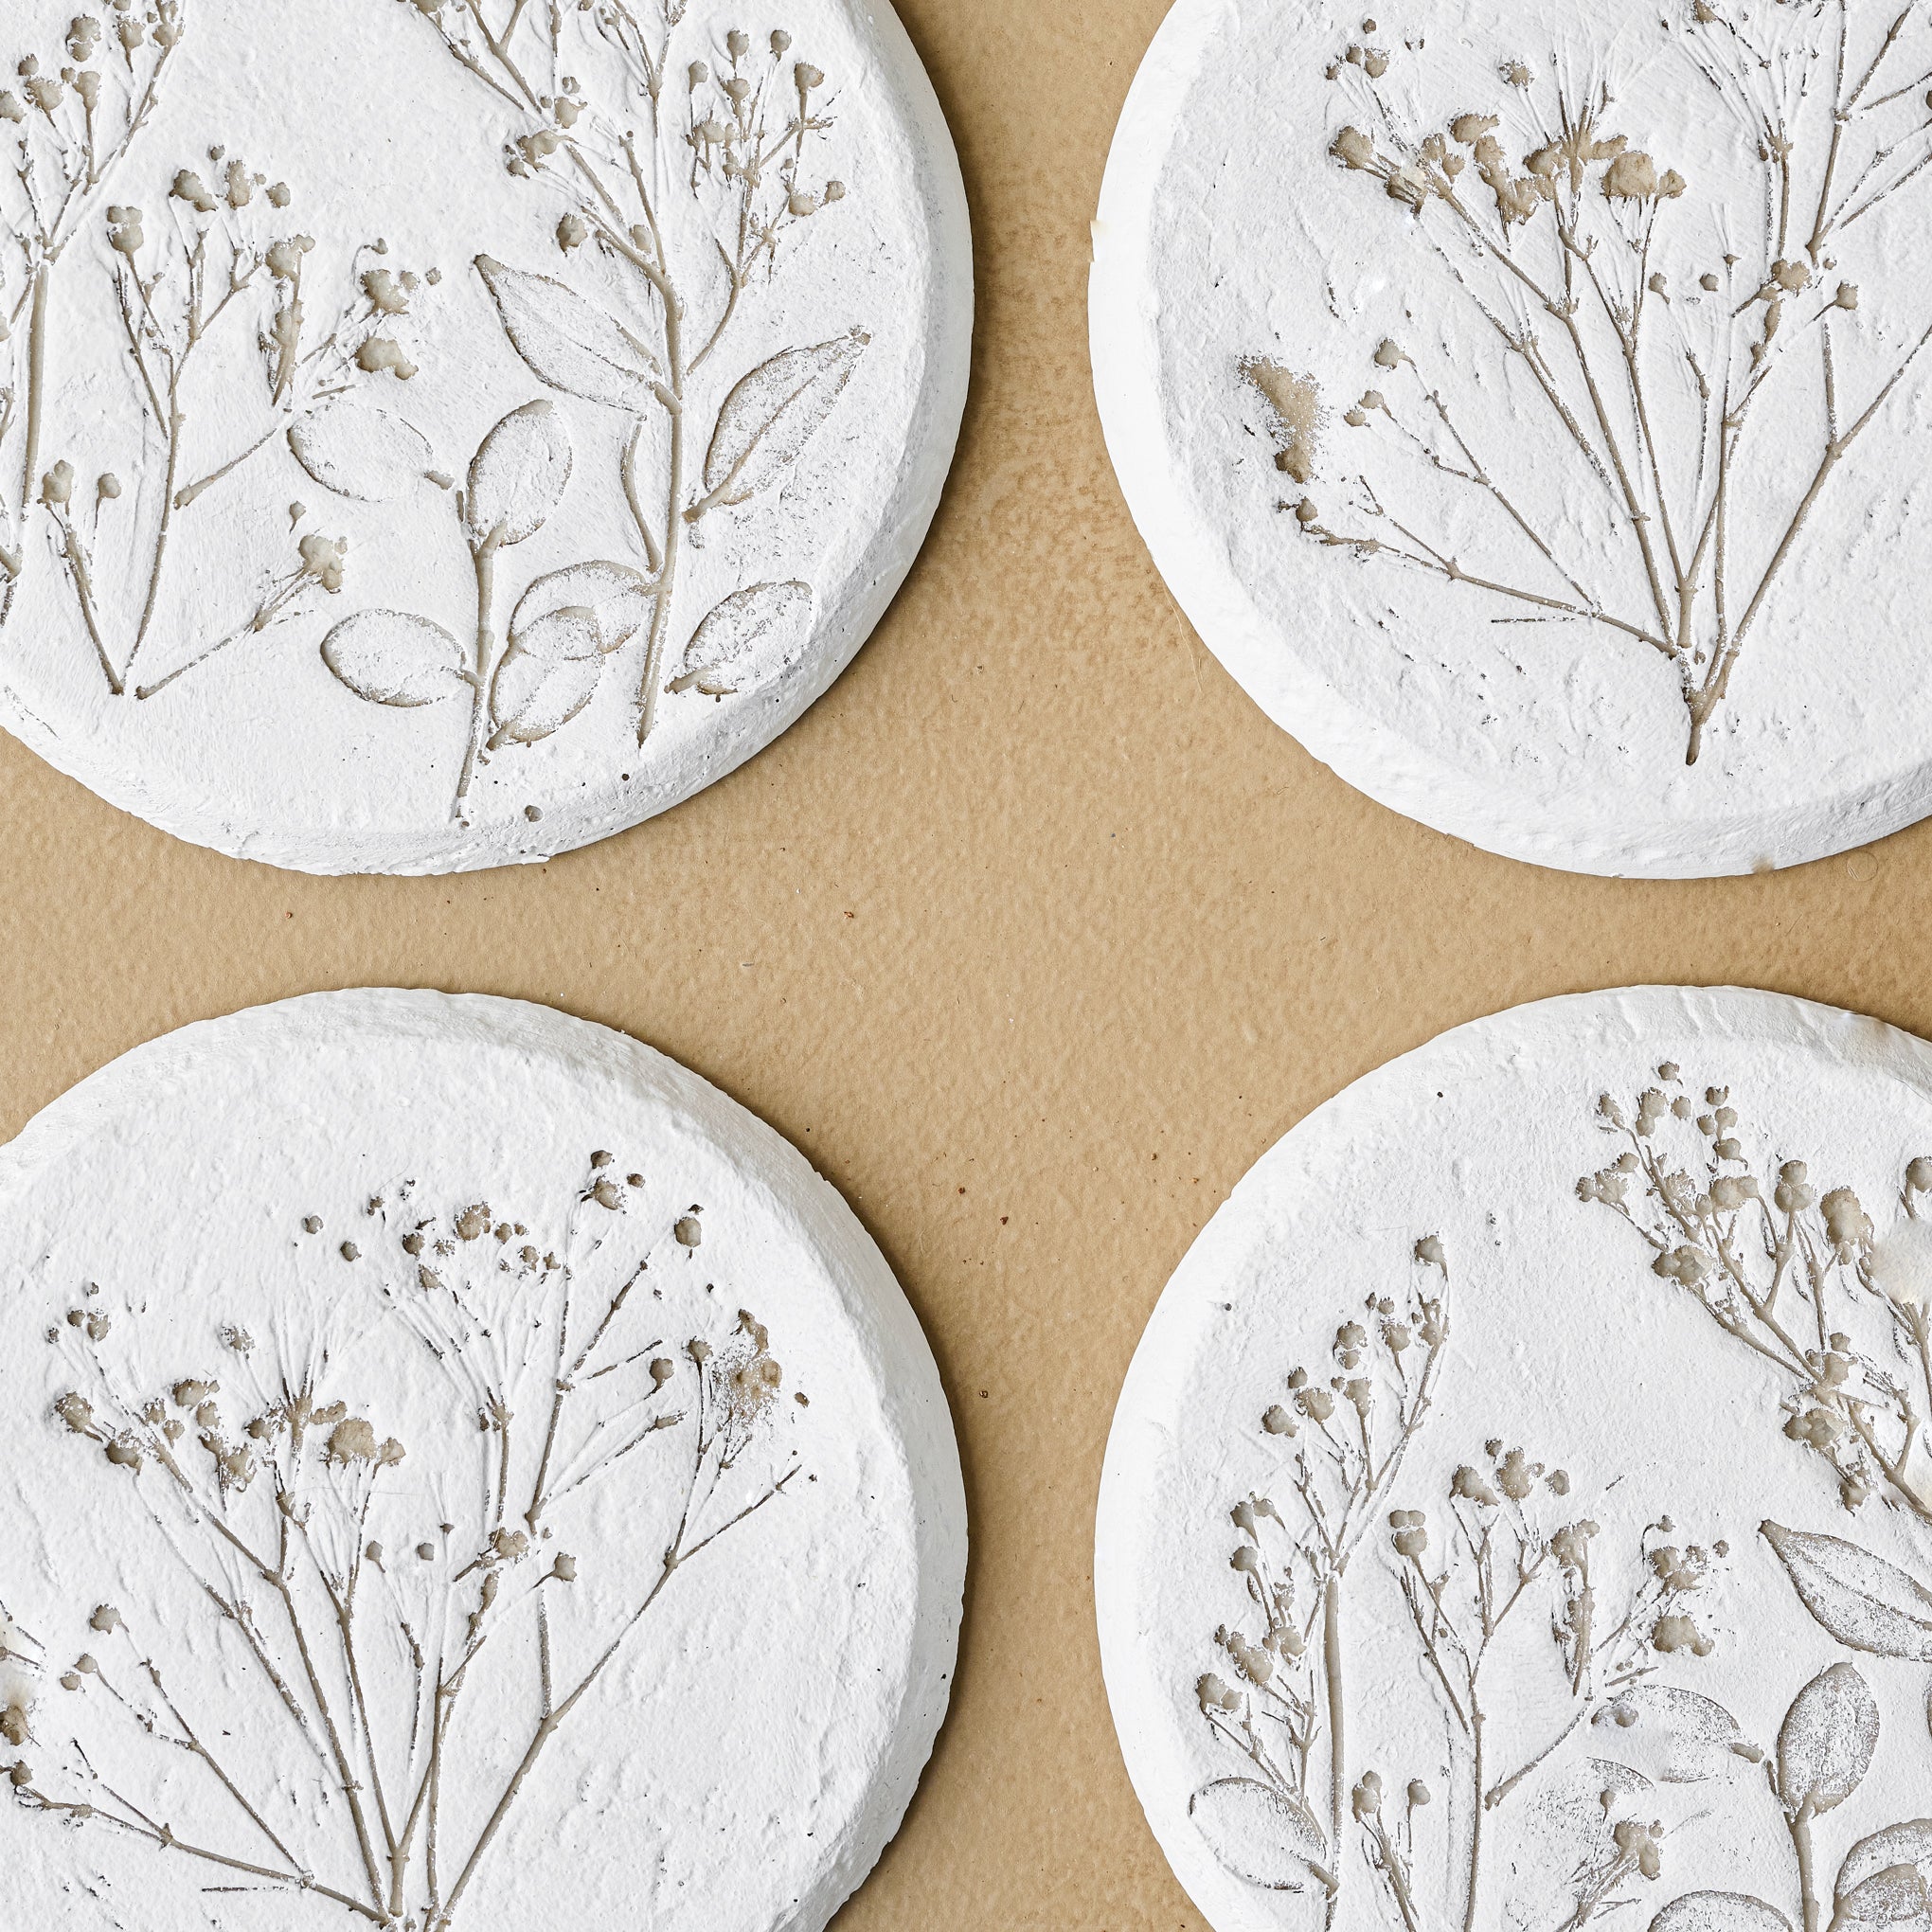 Pressed Flower Plaque Coasters 4 shown $18.00